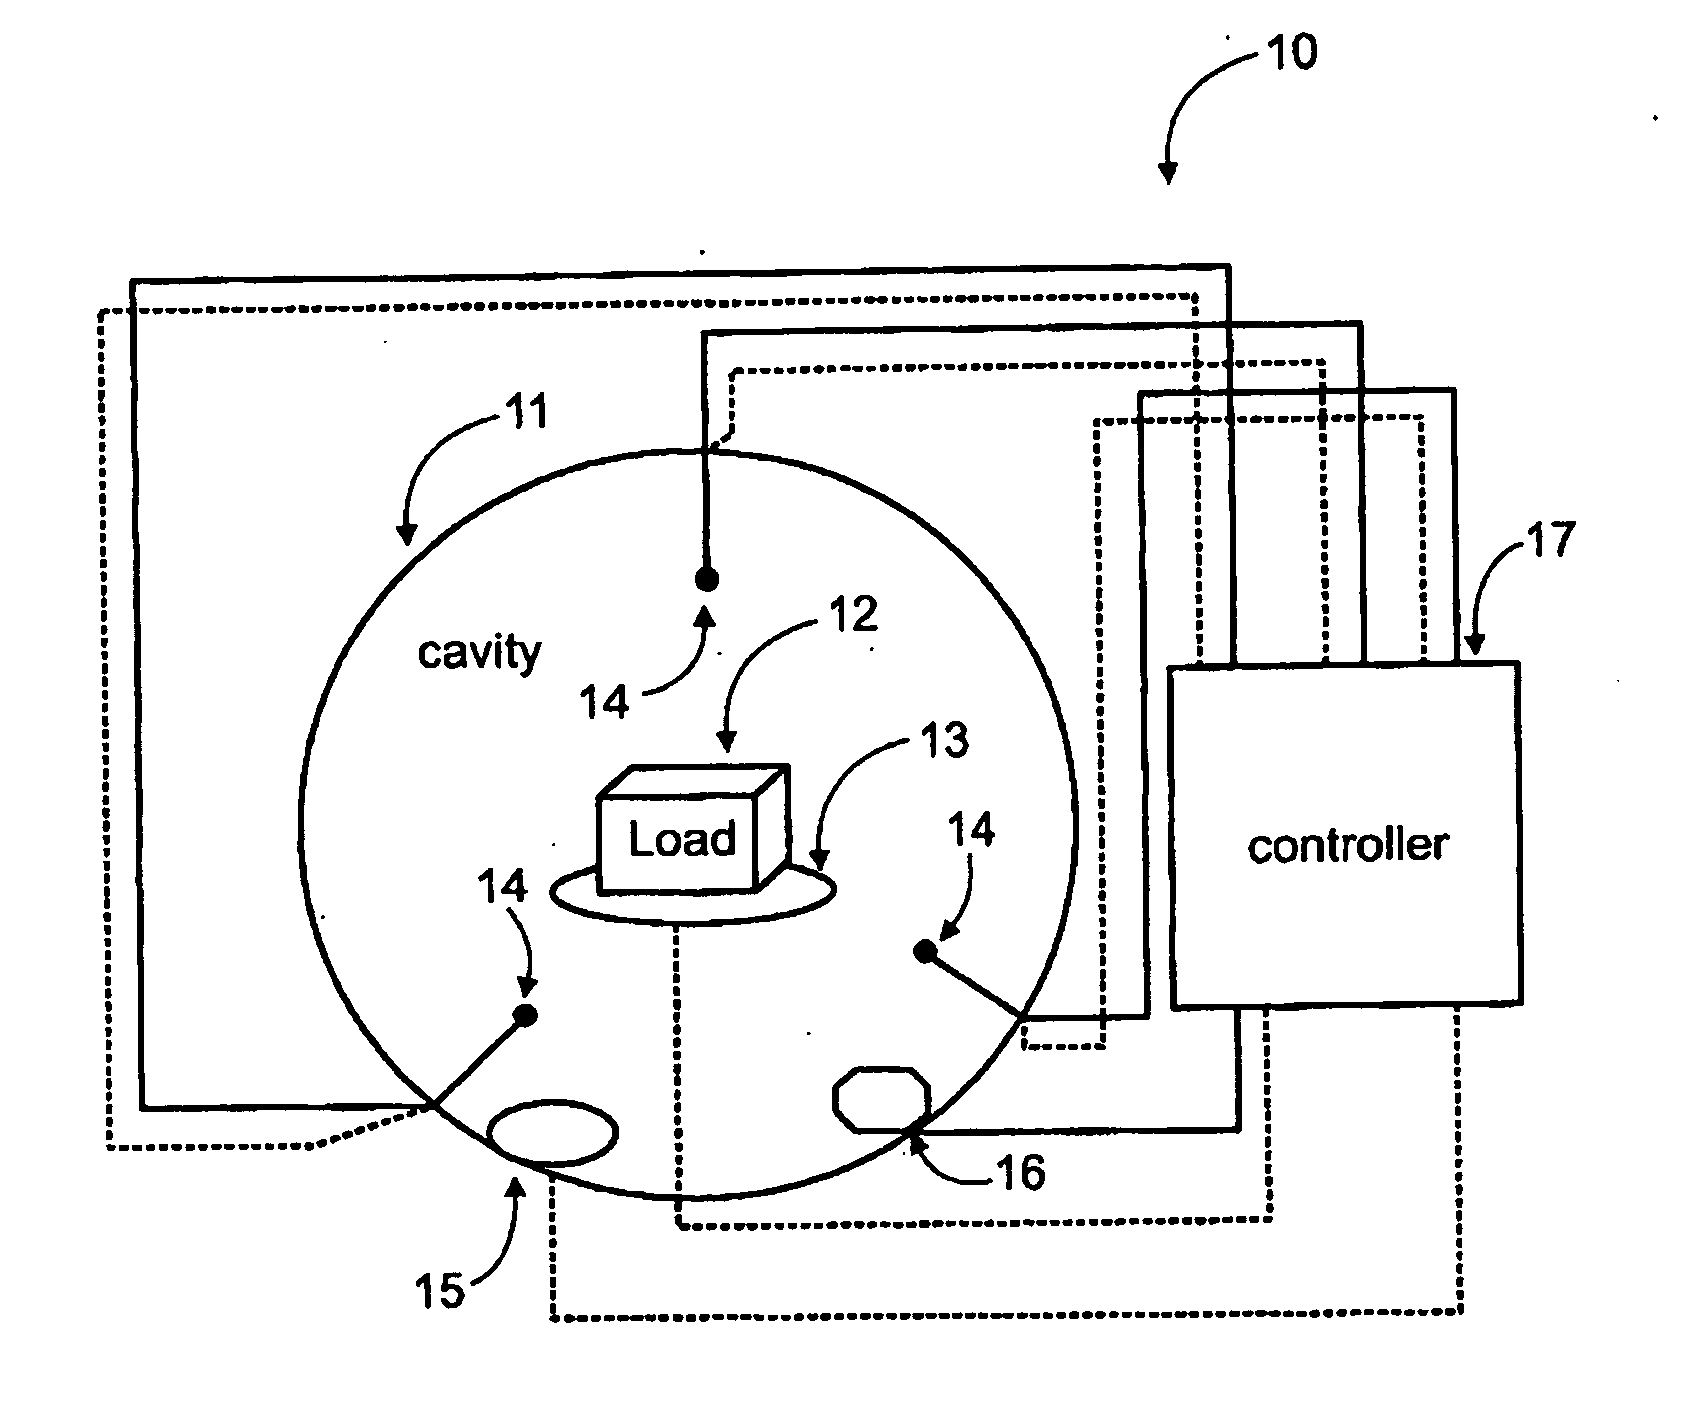 Device and method for heating using RF energy